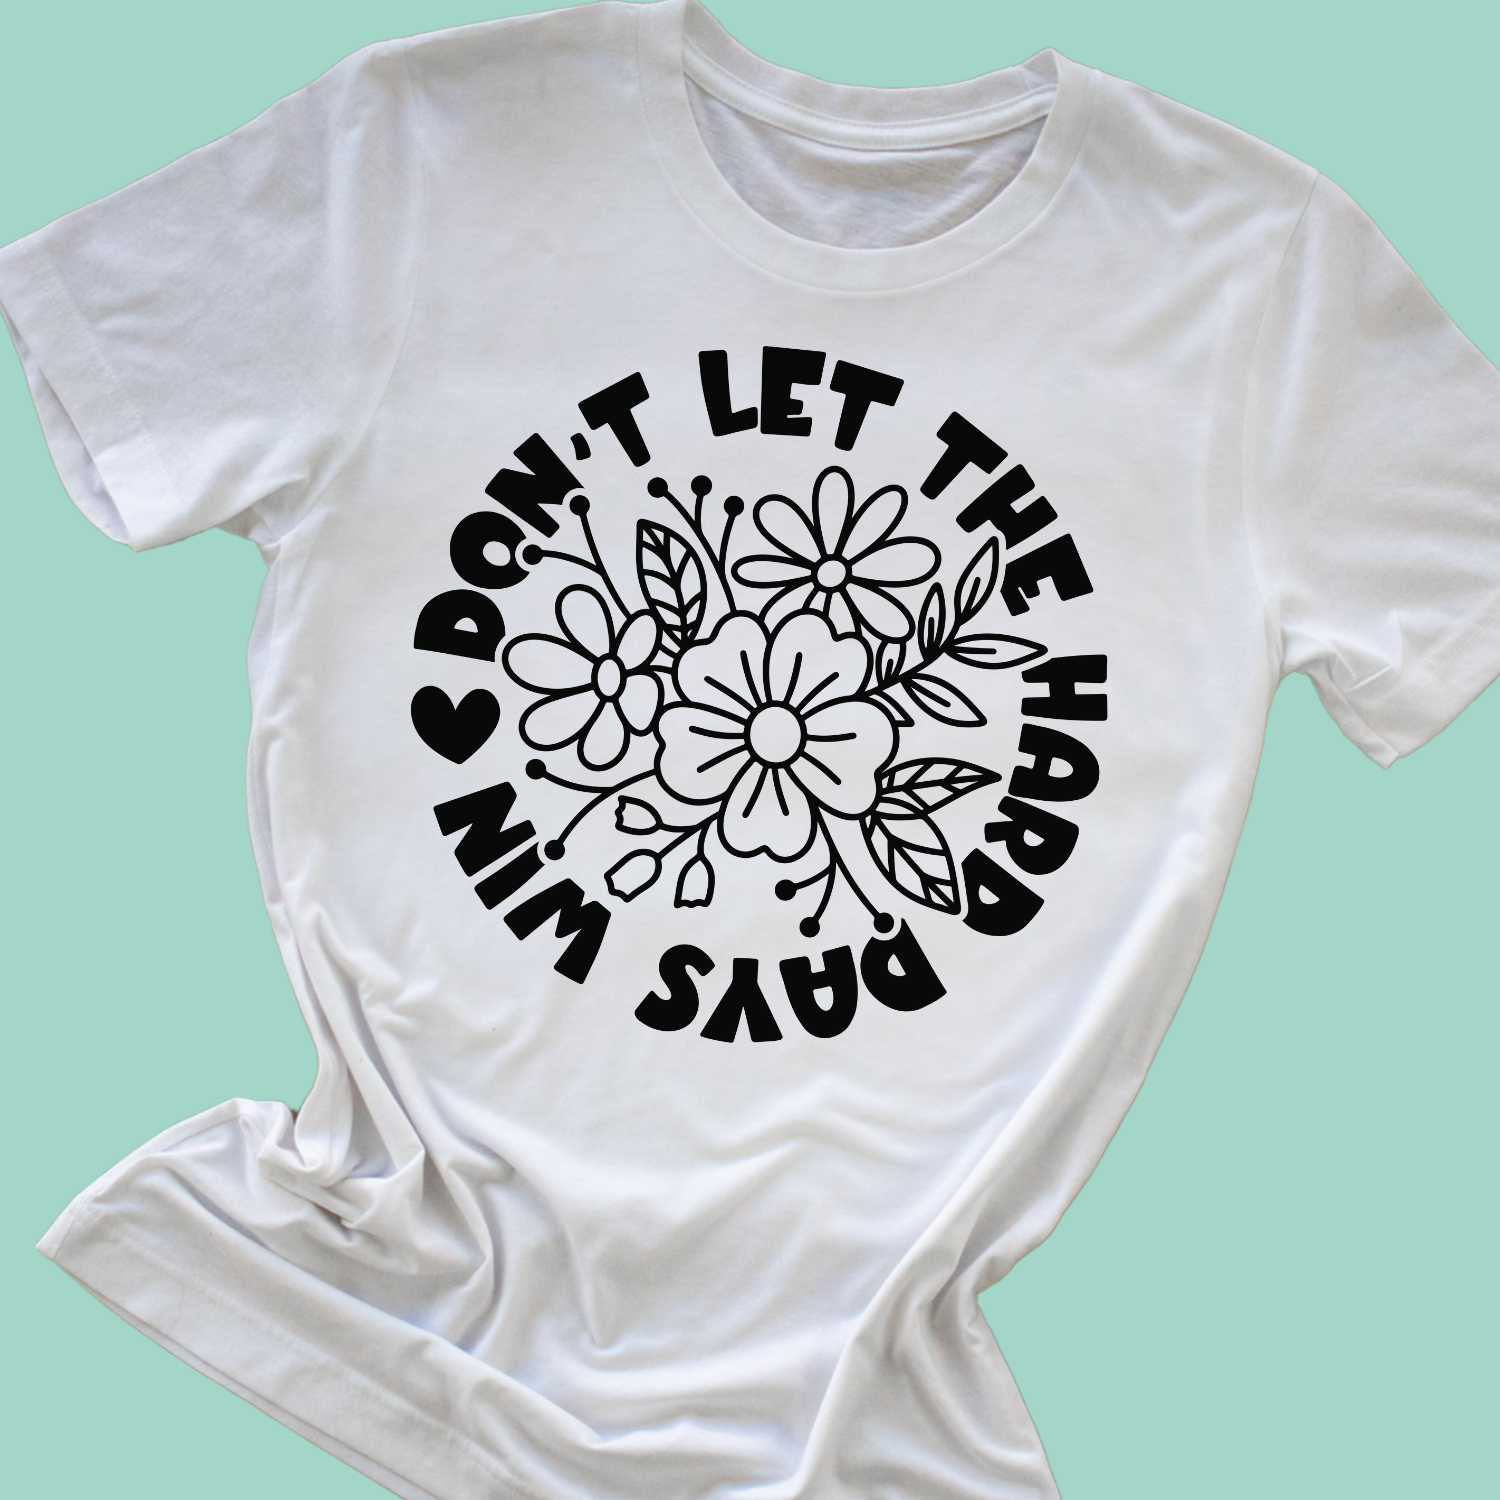 Don't Let the Hard Days Win Shirt